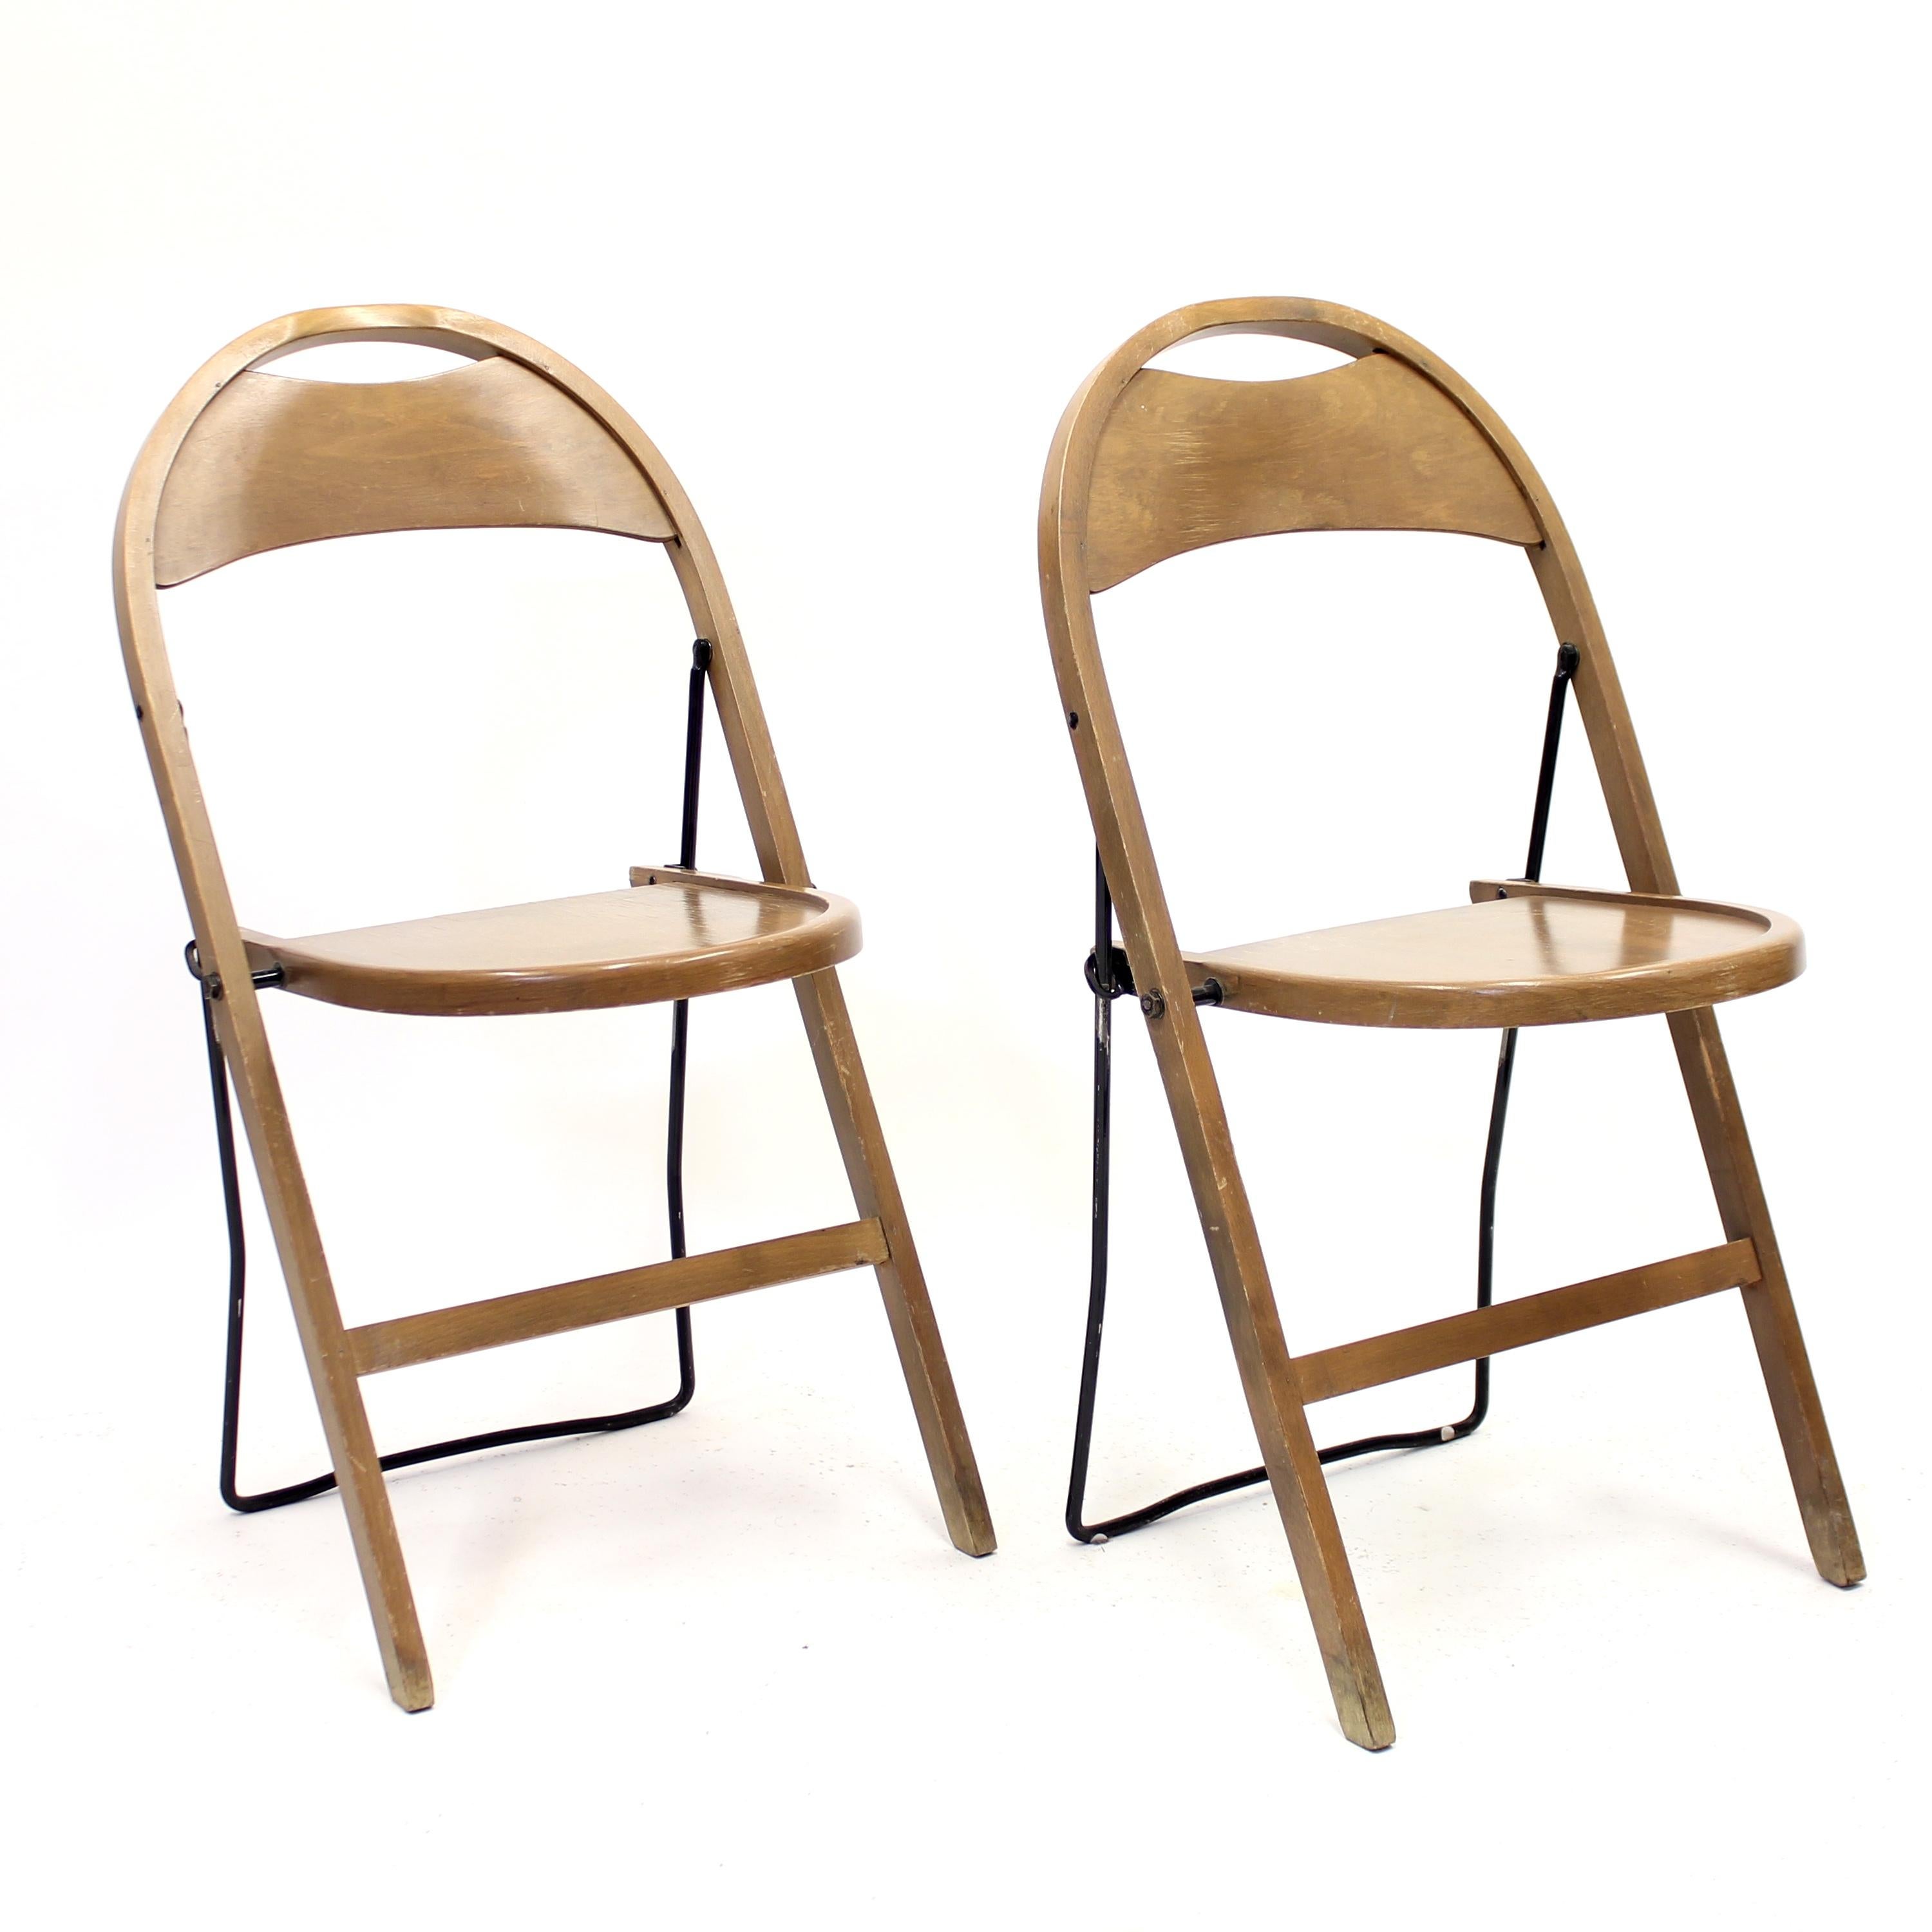 Pair of folding chairs designed by C.A Buffington in the 1930s for Swedish manufacturer Gemla in the 1950s. This model is also sometimes attributed to Swedish designer Uno Åhrén who have done a few things for Gemla over the years. Seat, back and